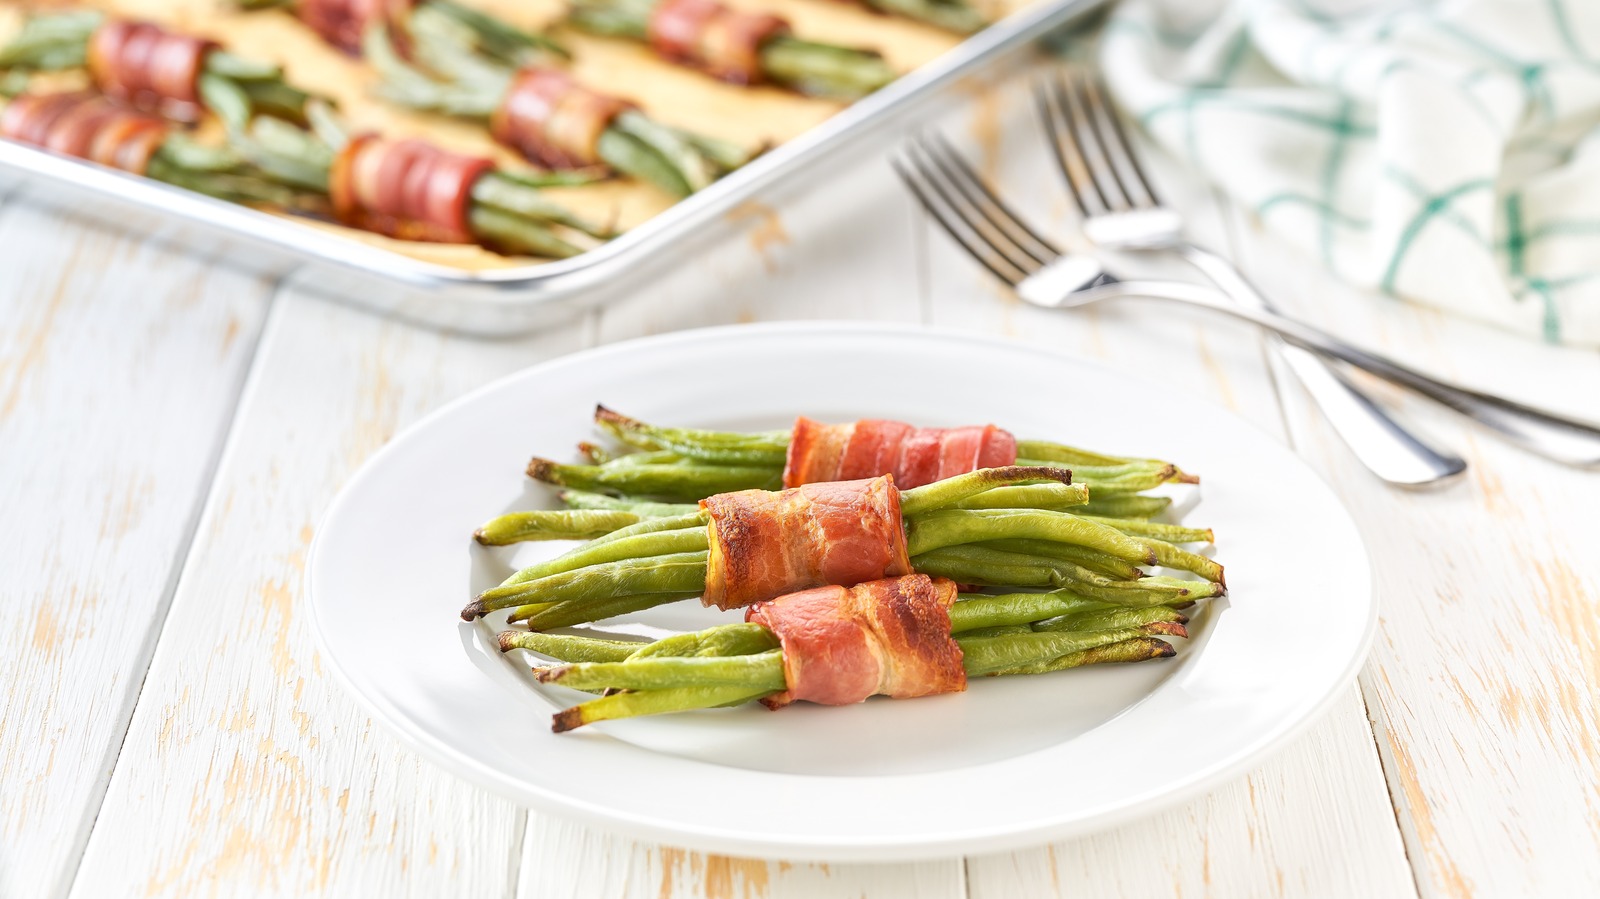 Green beans are much tastier with a belt of caramelized bacon